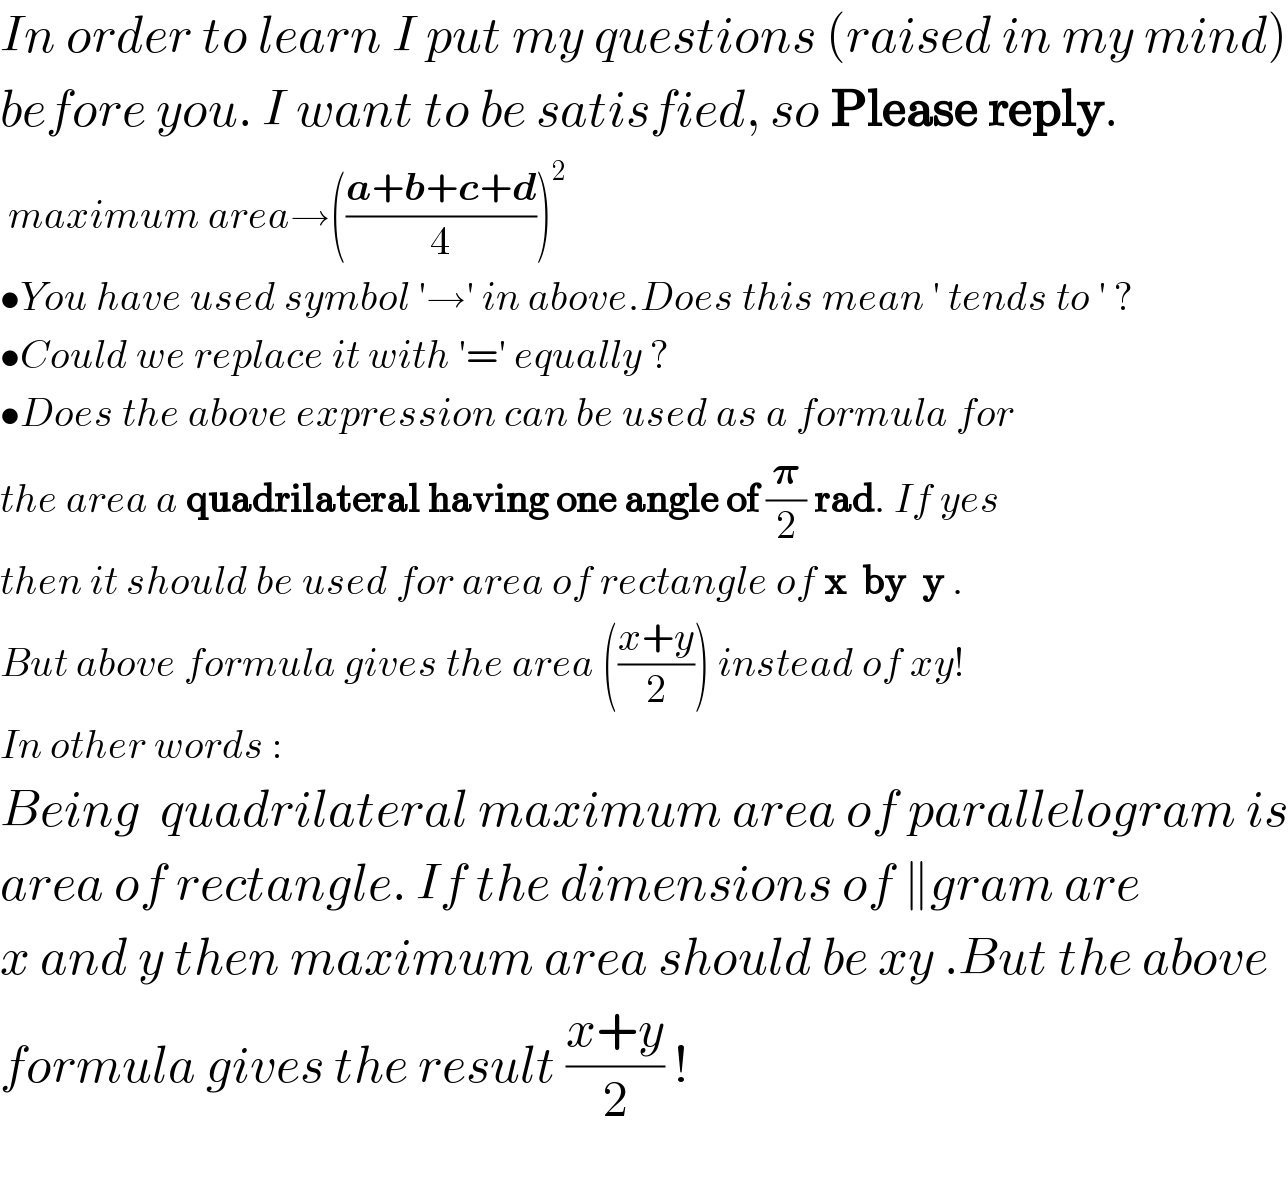 In order to learn I put my questions (raised in my mind)  before you. I want to be satisfied, so Please reply.   maximum area→(((a+b+c+d)/4))^2             •You have used symbol ′→′ in above.Does this mean ′ tends to ′ ?  •Could we replace it with ′=′ equally ?  •Does the above expression can be used as a formula for   the area a quadrilateral having one angle of (𝛑/2) rad. If yes  then it should be used for area of rectangle of x  by  y .  But above formula gives the area (((x+y)/2)) instead of xy!  In other words :  Being  quadrilateral maximum area of parallelogram is  area of rectangle. If the dimensions of ∥gram are  x and y then maximum area should be xy .But the above   formula gives the result ((x+y)/2) !    